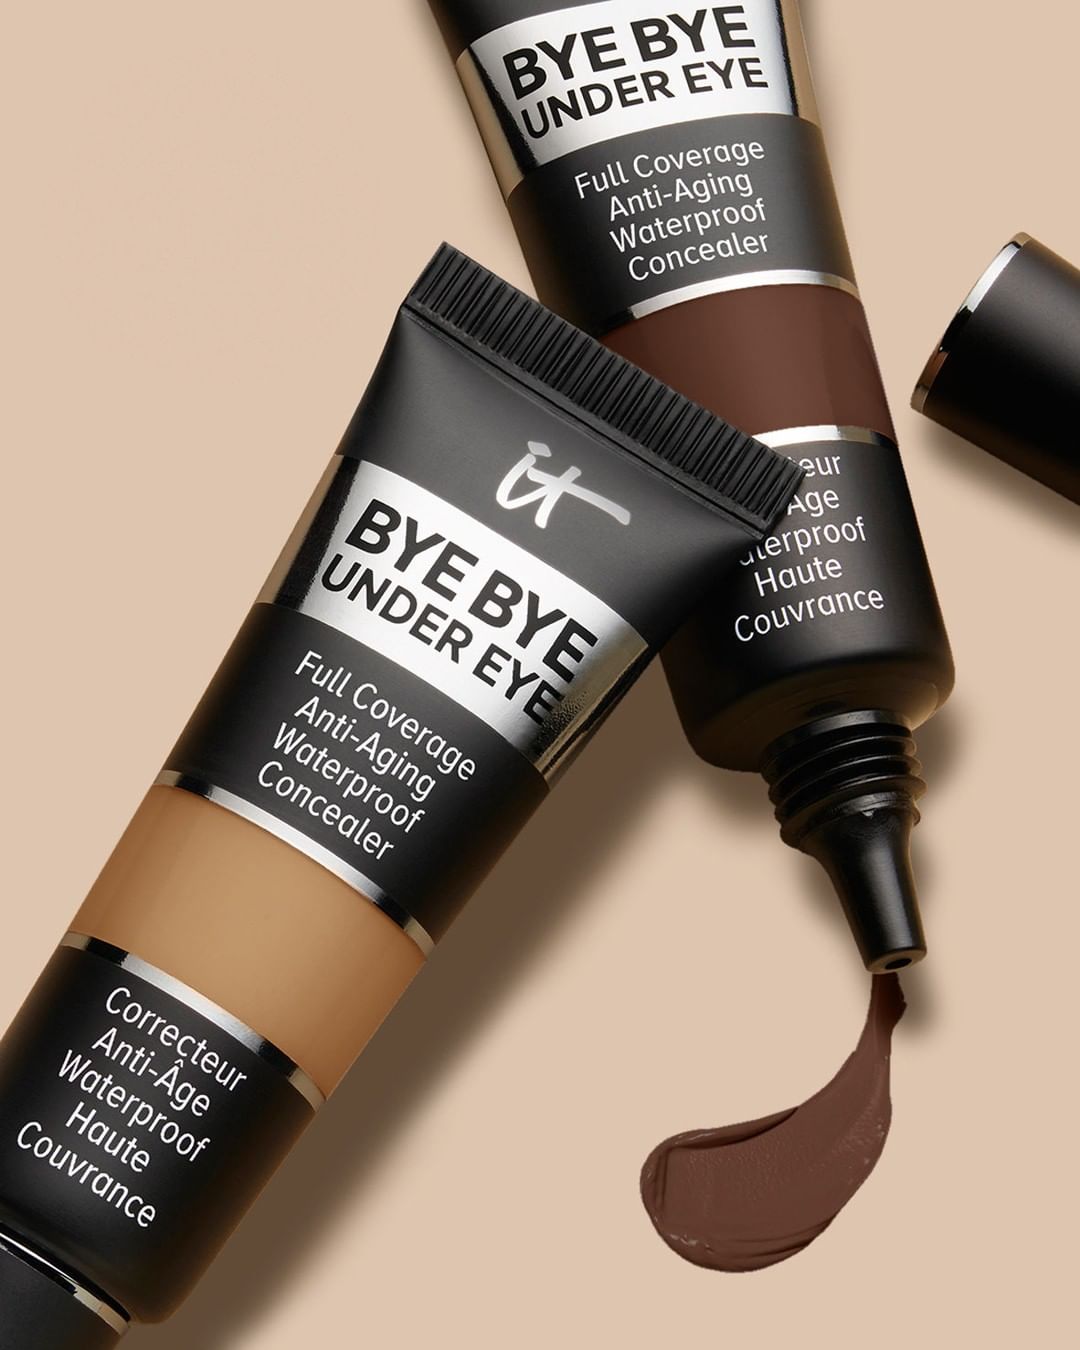 15 Beauty Products From Nordstrom That Are Absolutely Worth The Coins